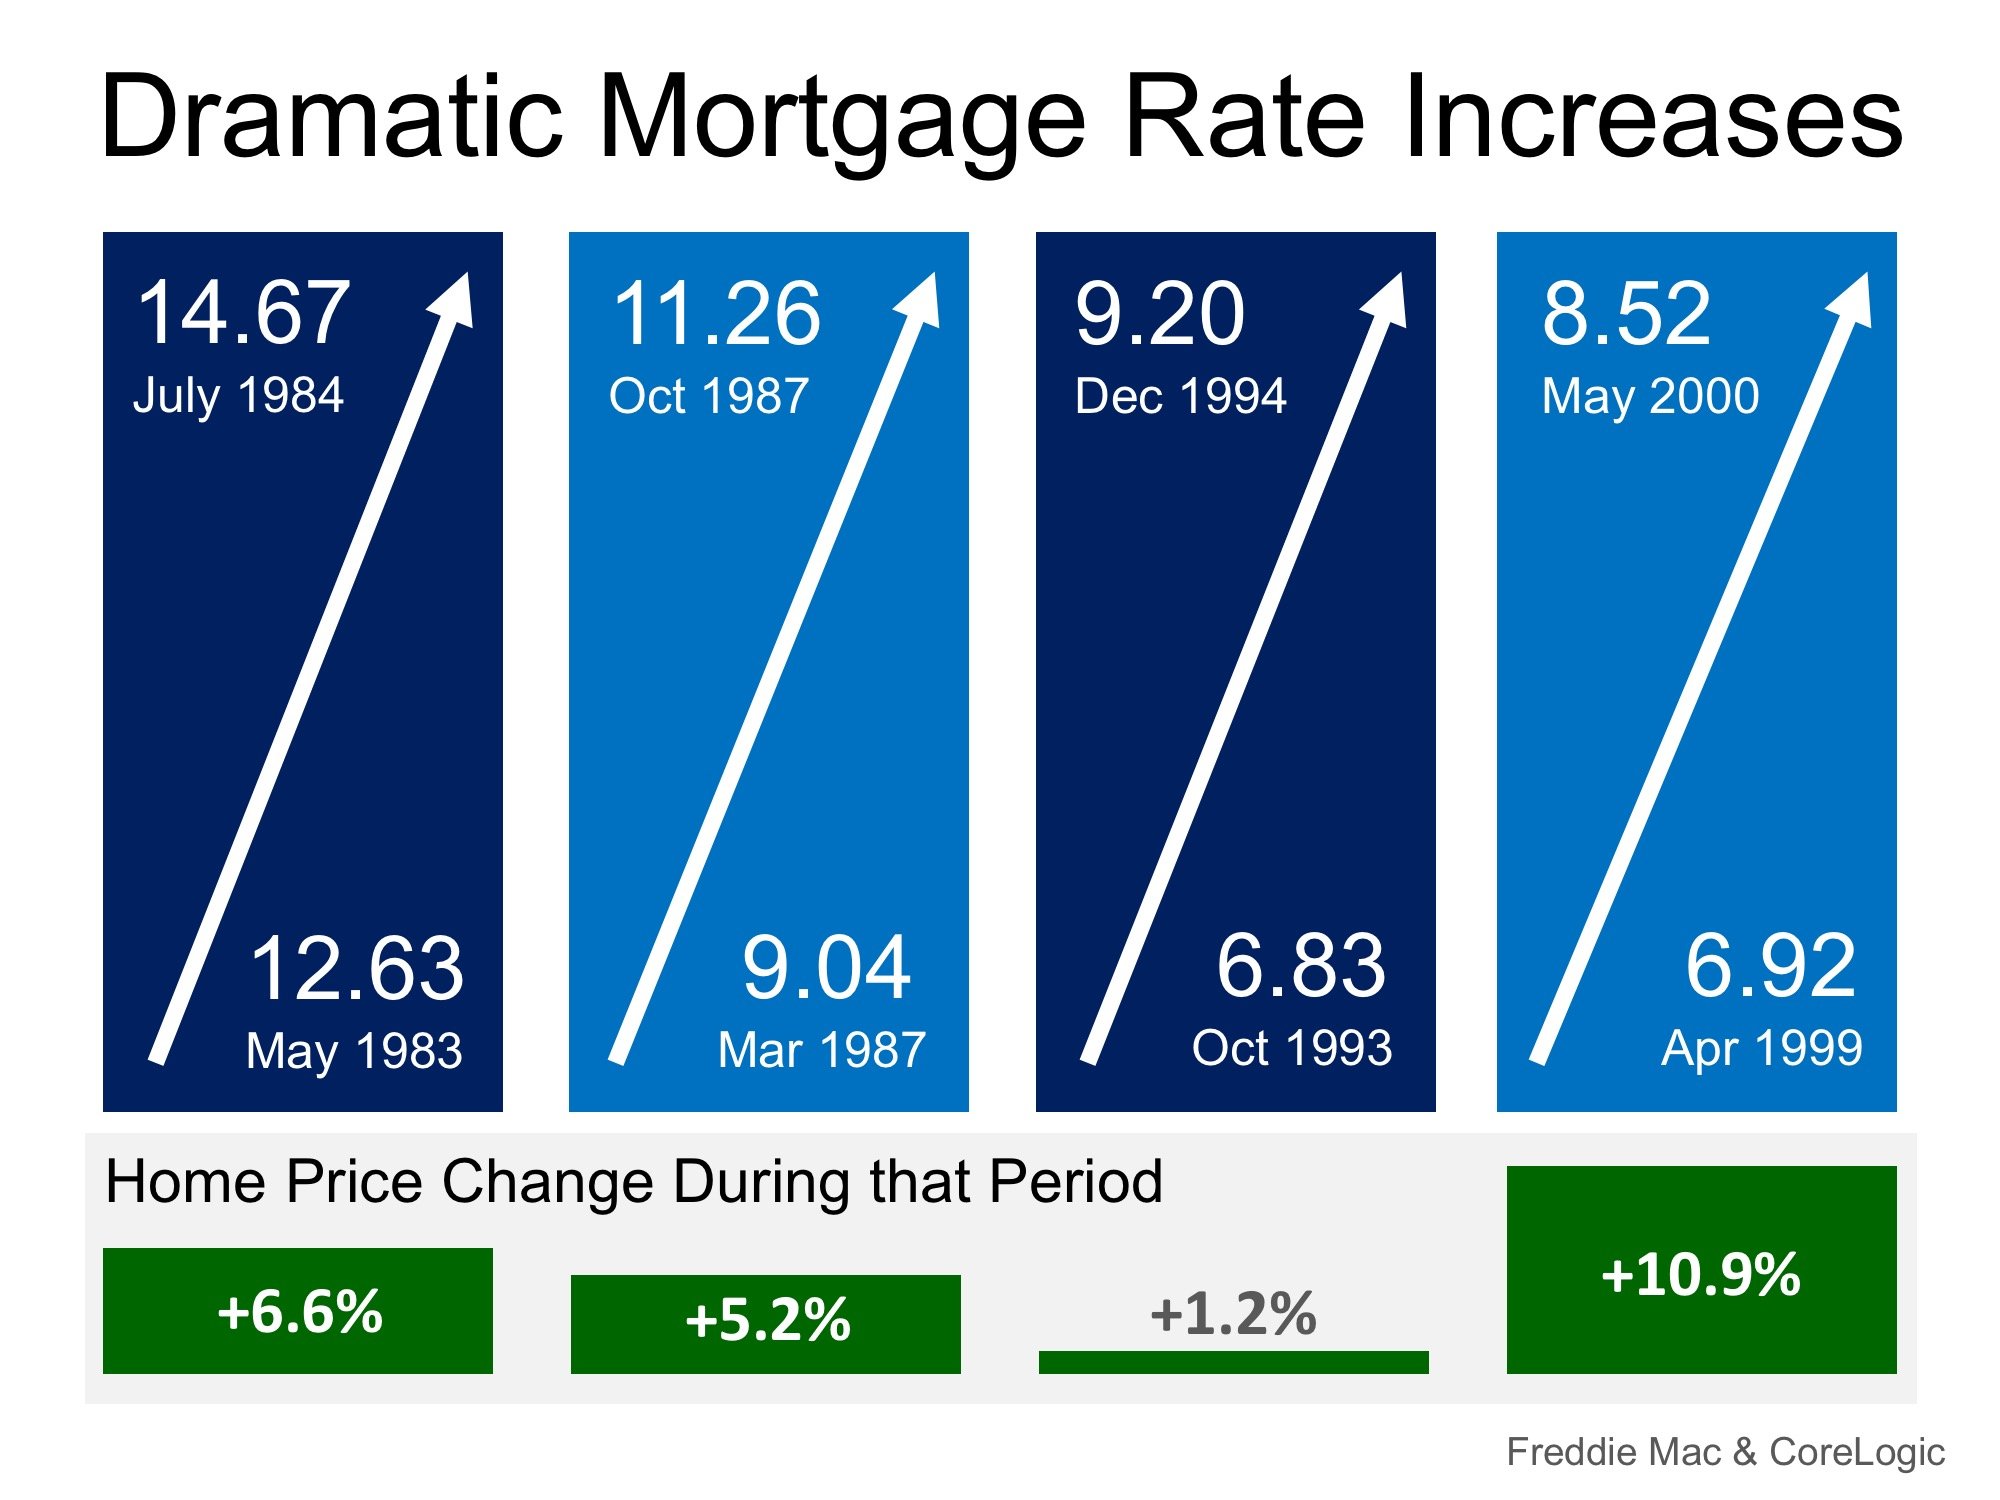 Mortgage Rates on FIRE! Home Prices Up in Smoke? | Simplifying The Market